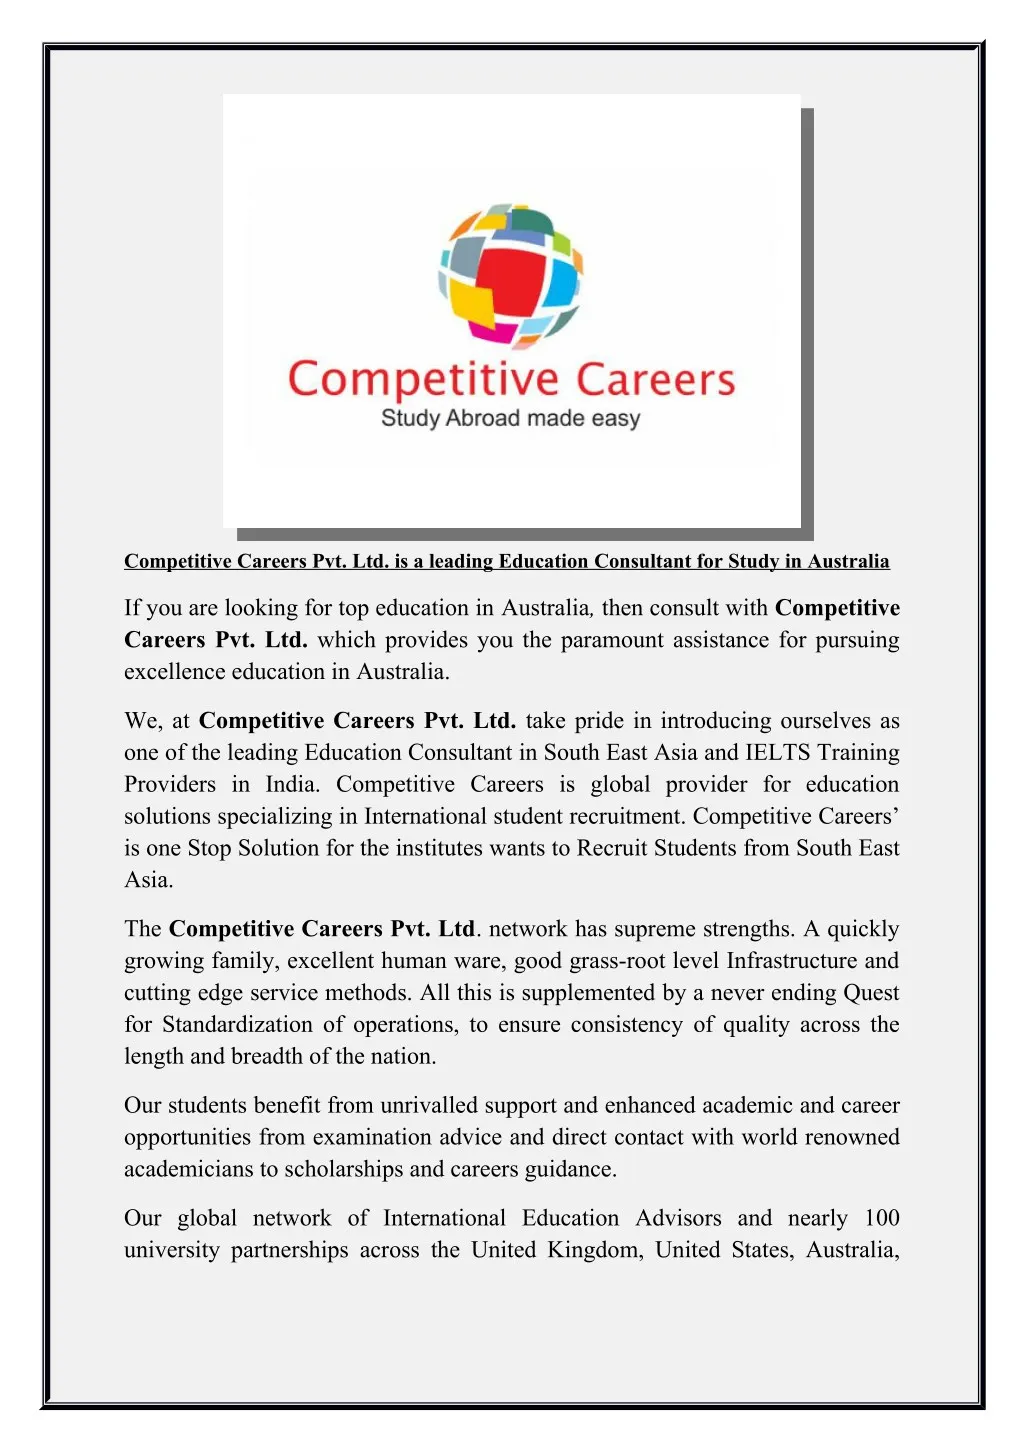 competitive careers pvt ltd is a leading